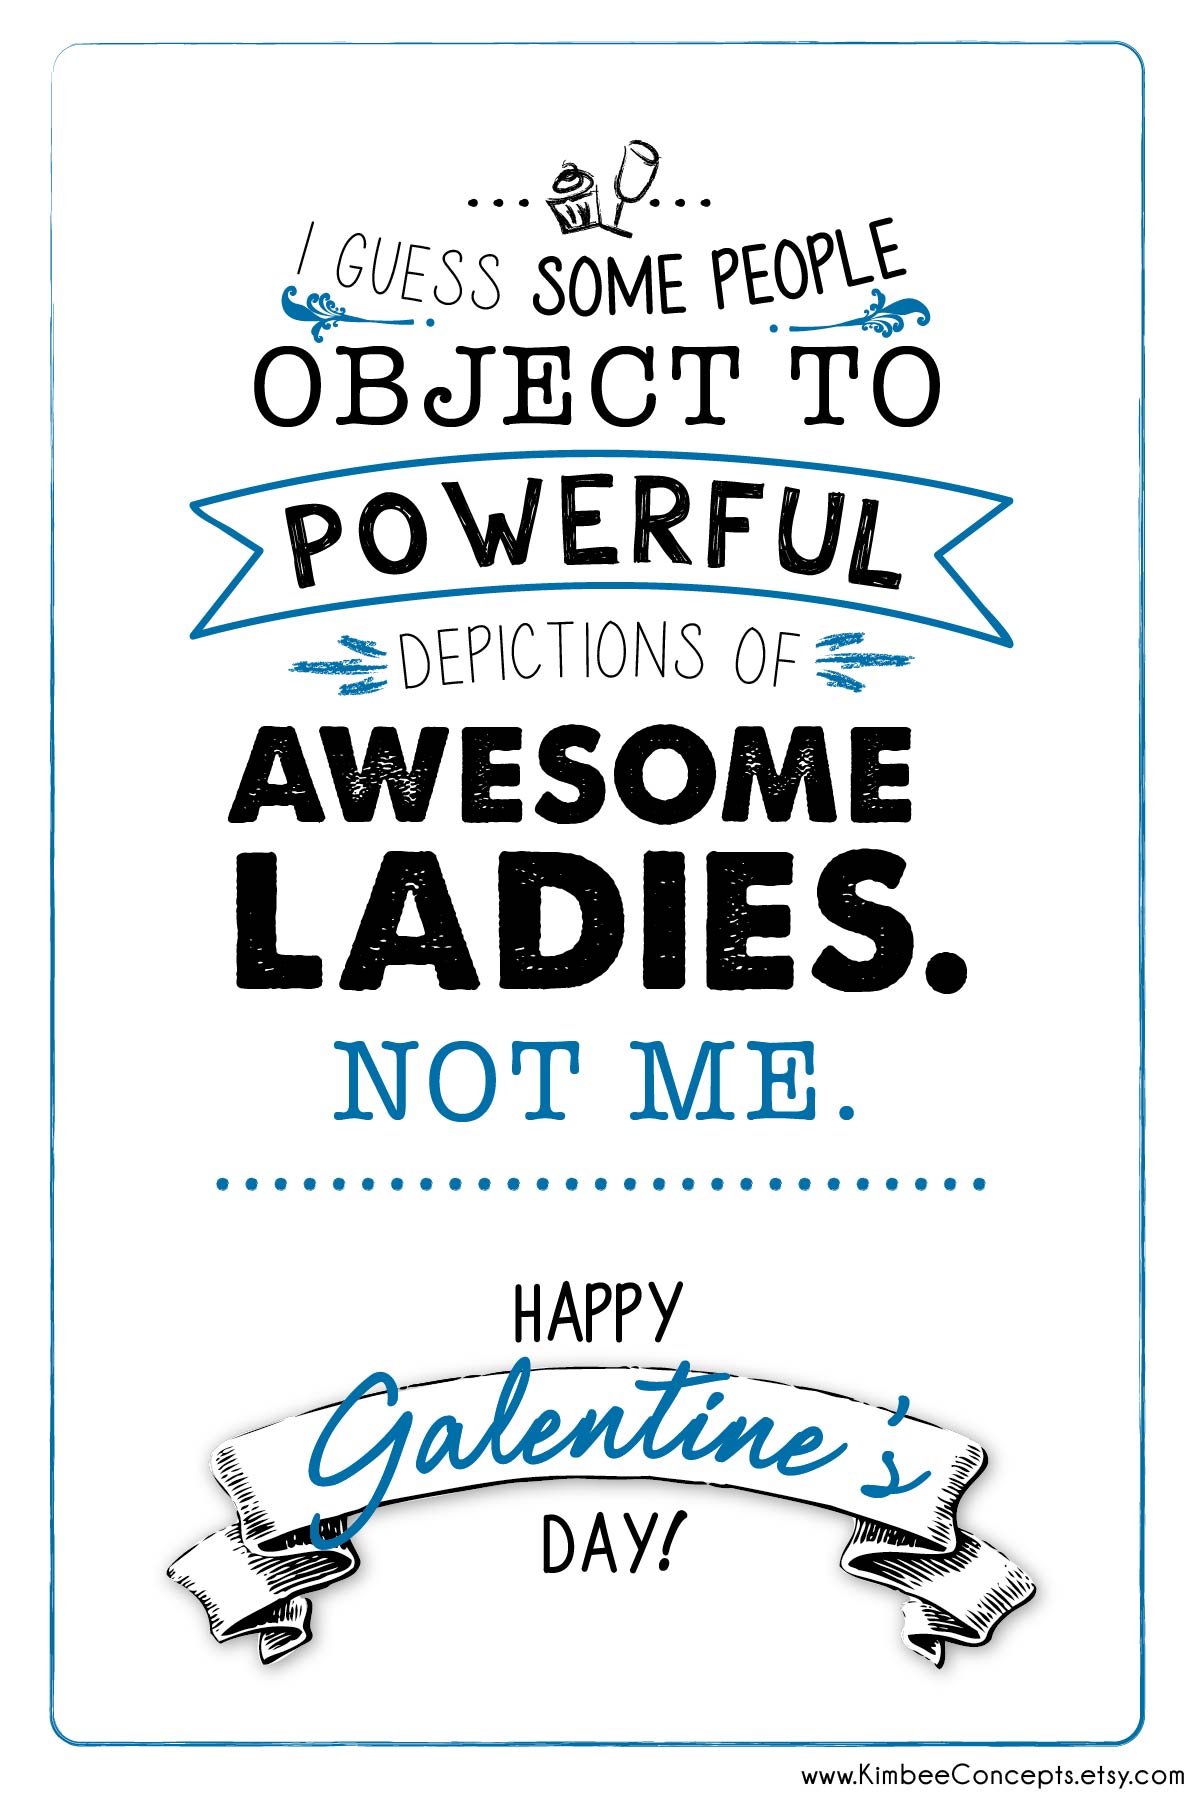 Free Galentines Day Card Powerful Women